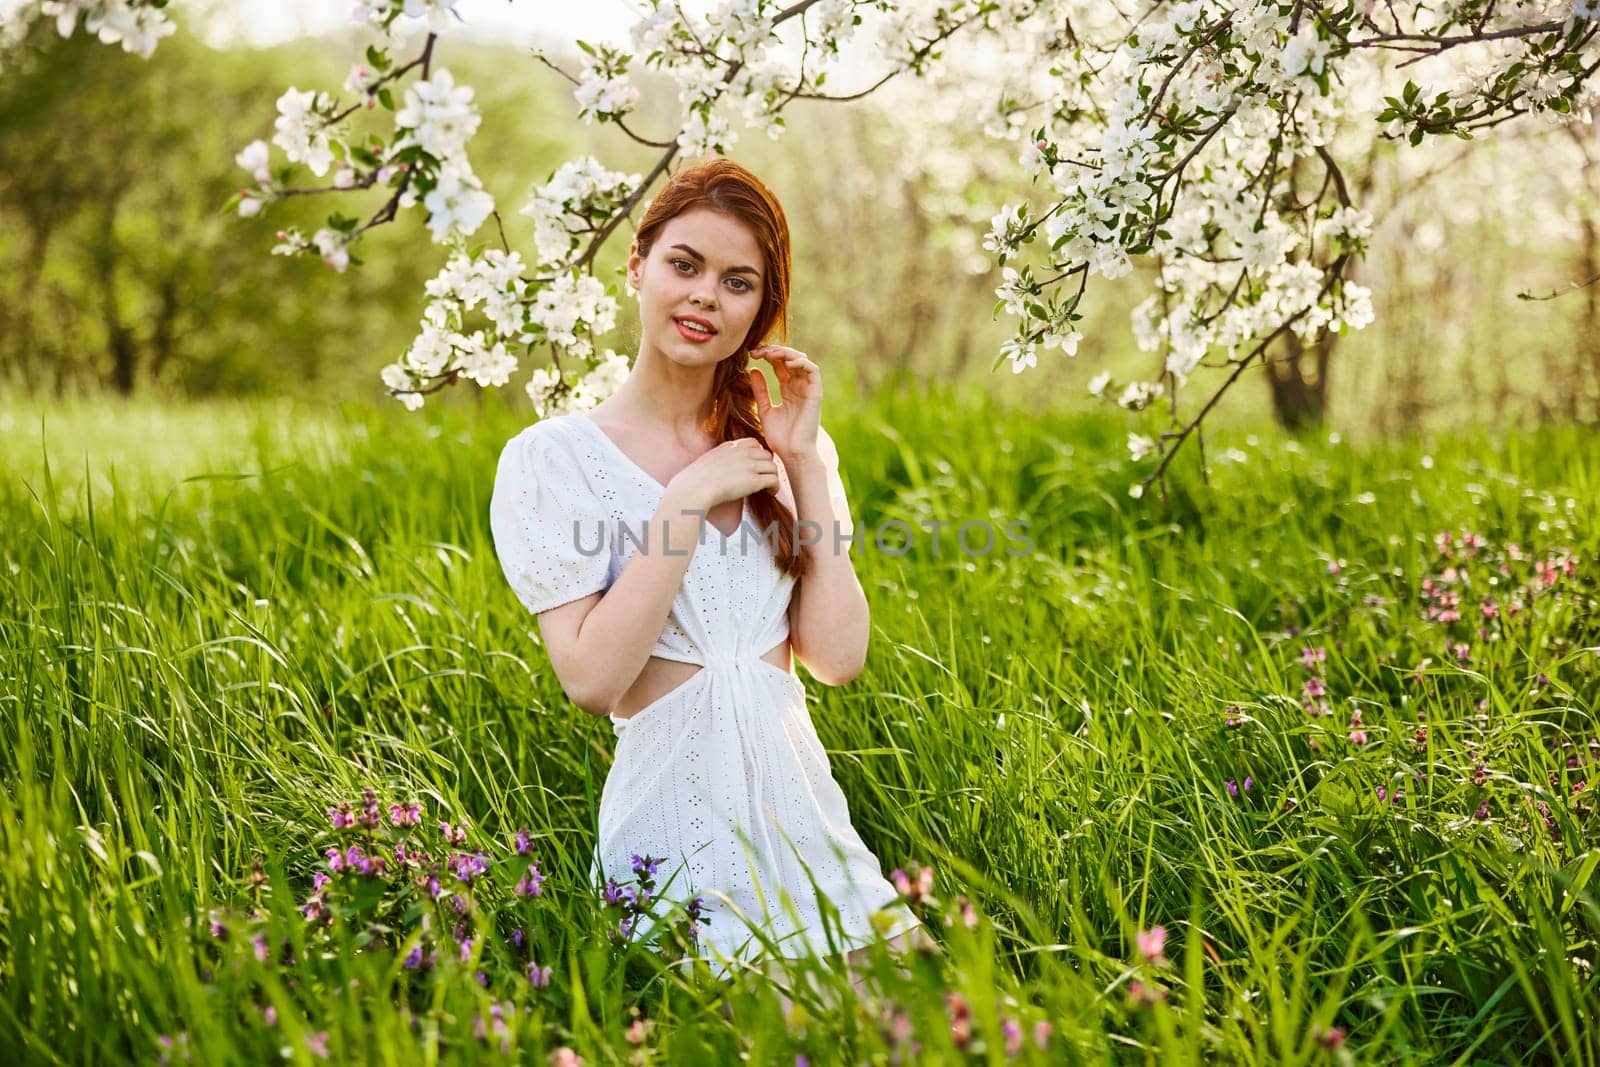 a young woman in a light summer dress stands near a tree with flowers and smiles looking at the camera. High quality photo